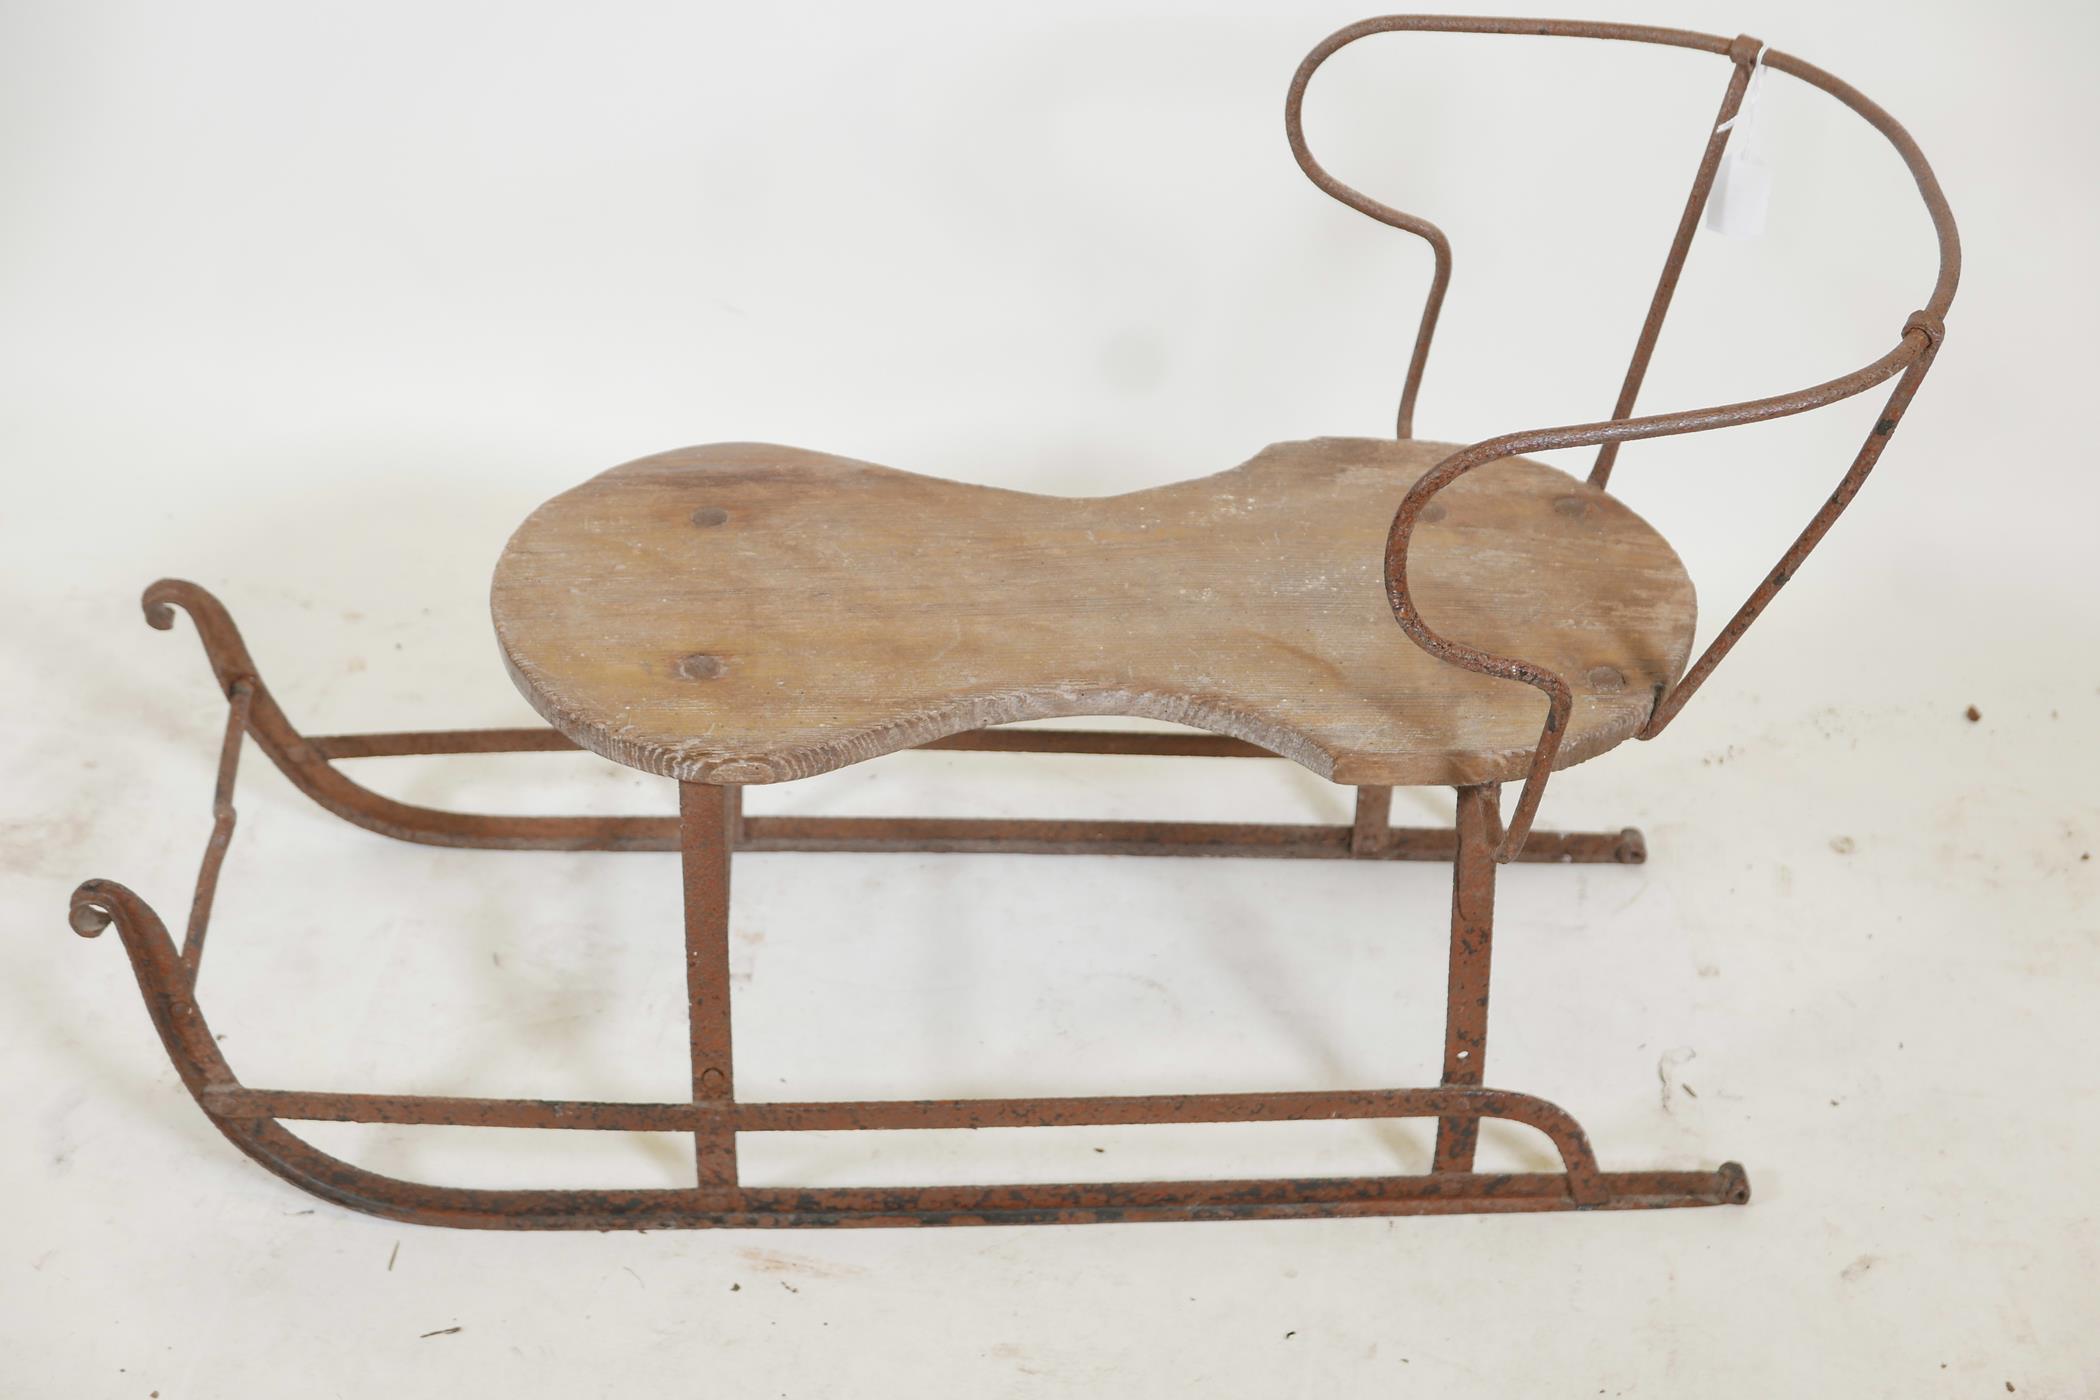 An antique child's sled, wrought iron with a wood seat, 32" x 20"high - Image 2 of 3